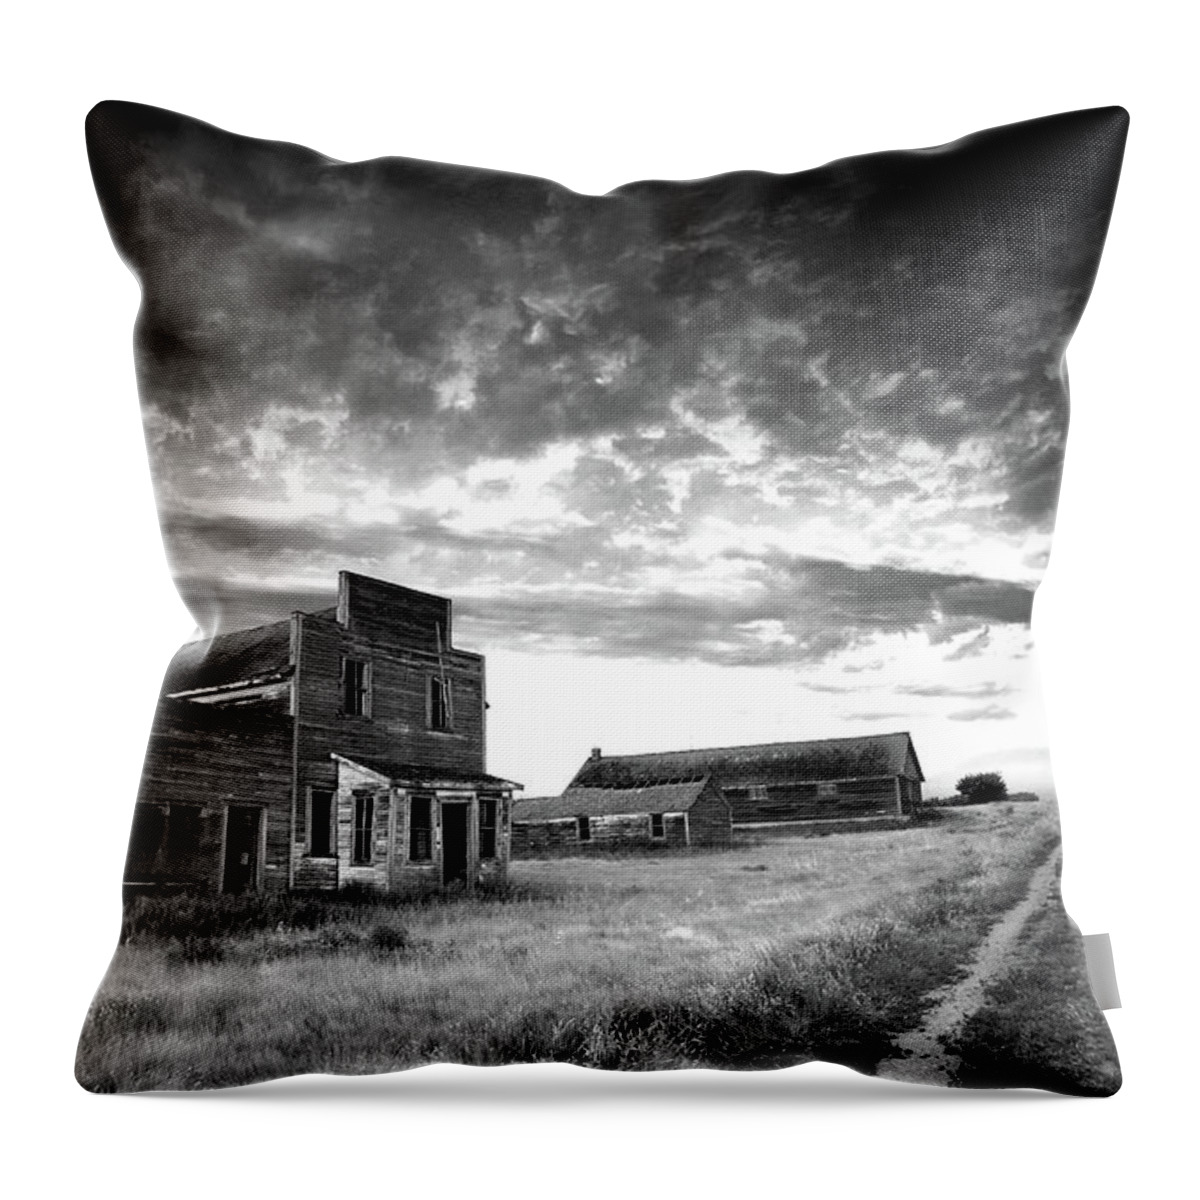 Scenics Throw Pillow featuring the photograph Prairie Ghost Town In Black And White by Imaginegolf